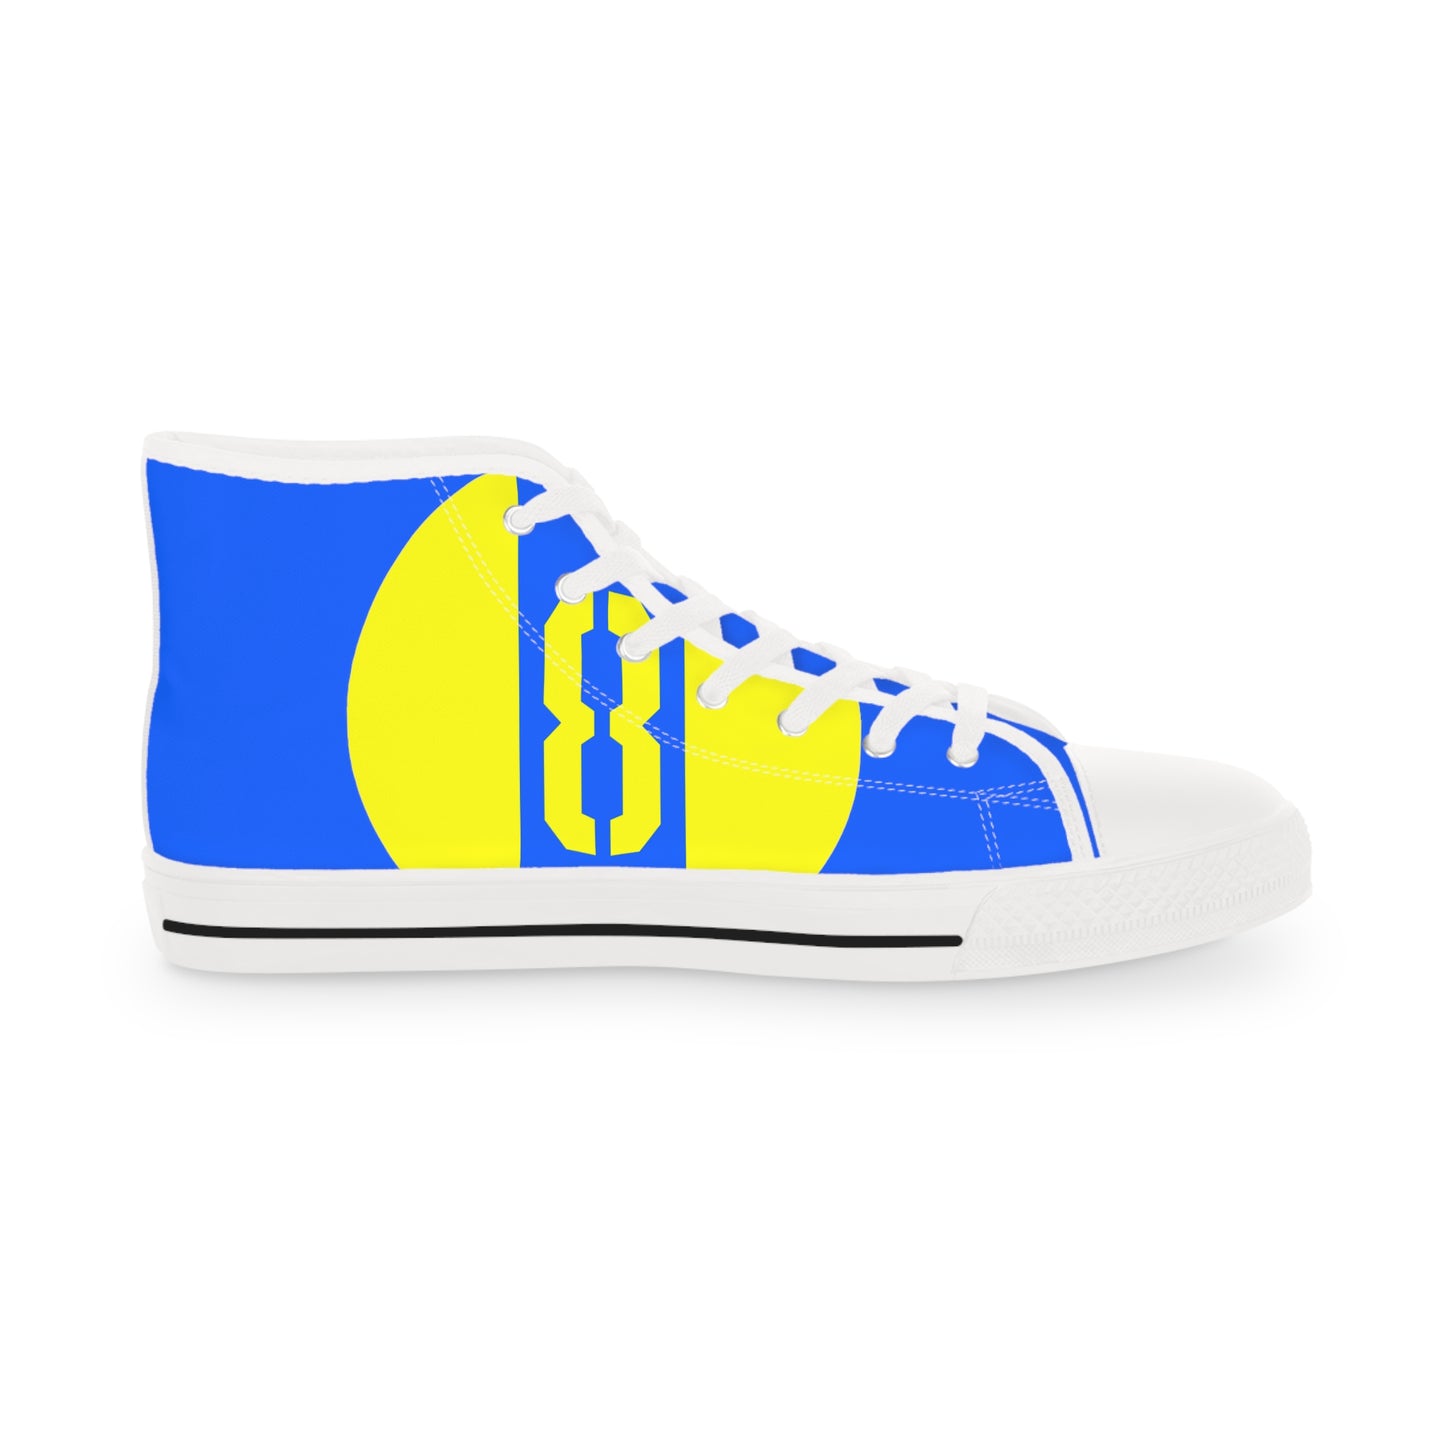 Limited Edition High Top Sneakers - 8 - Blue